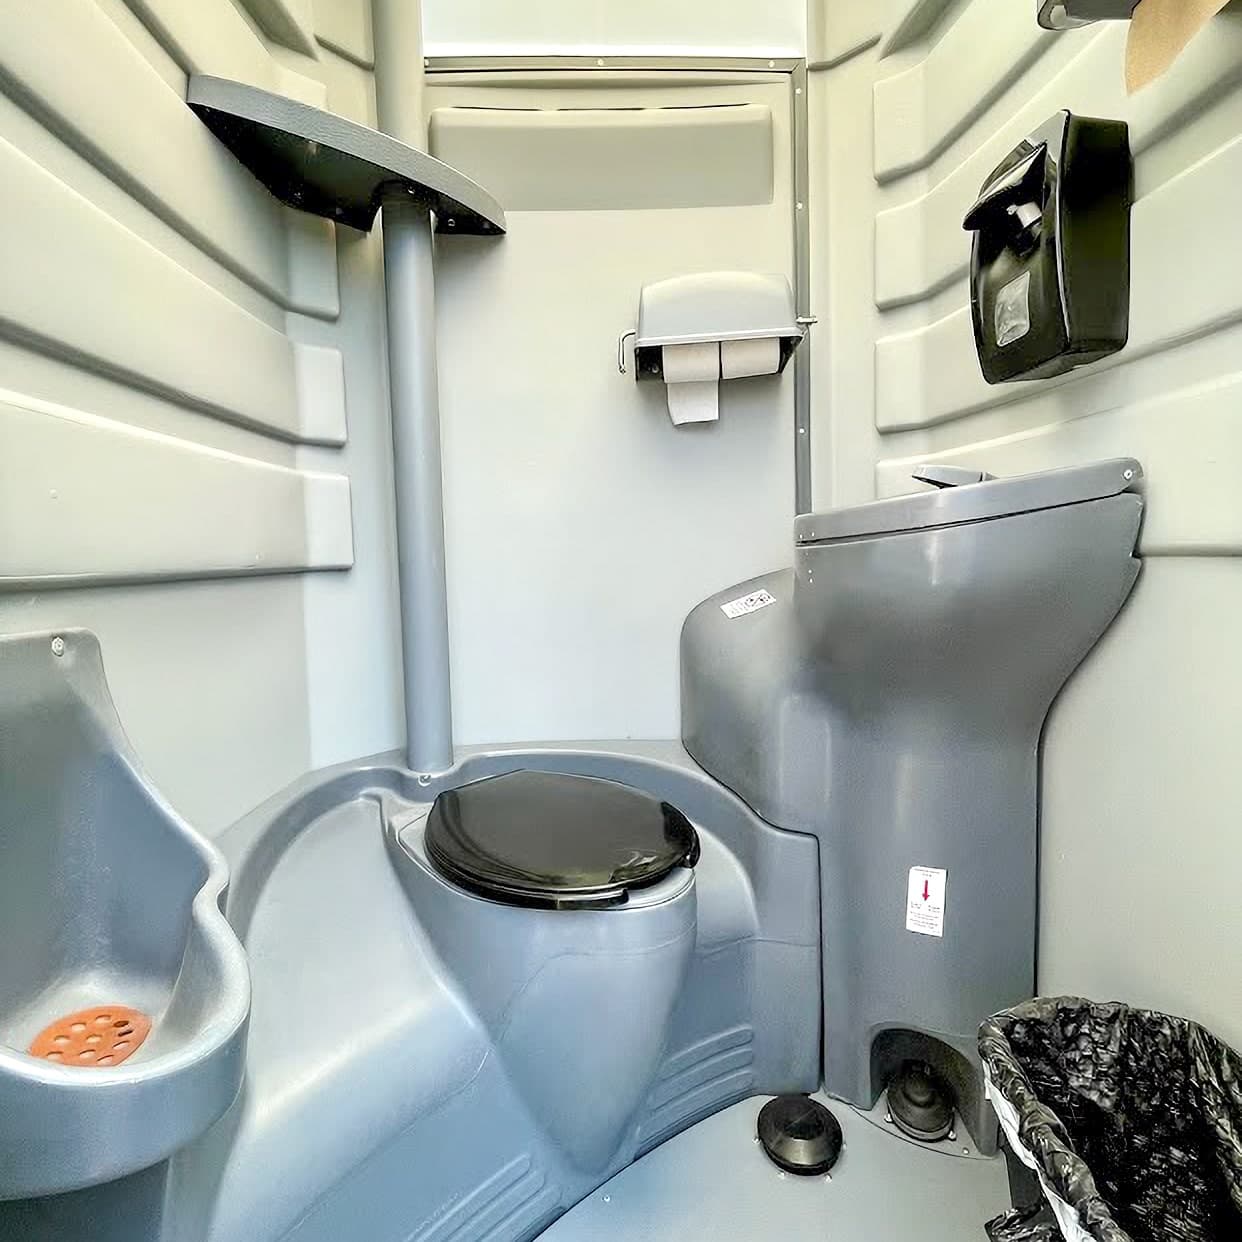 Interior of a portable restroom with toilet and urinal.